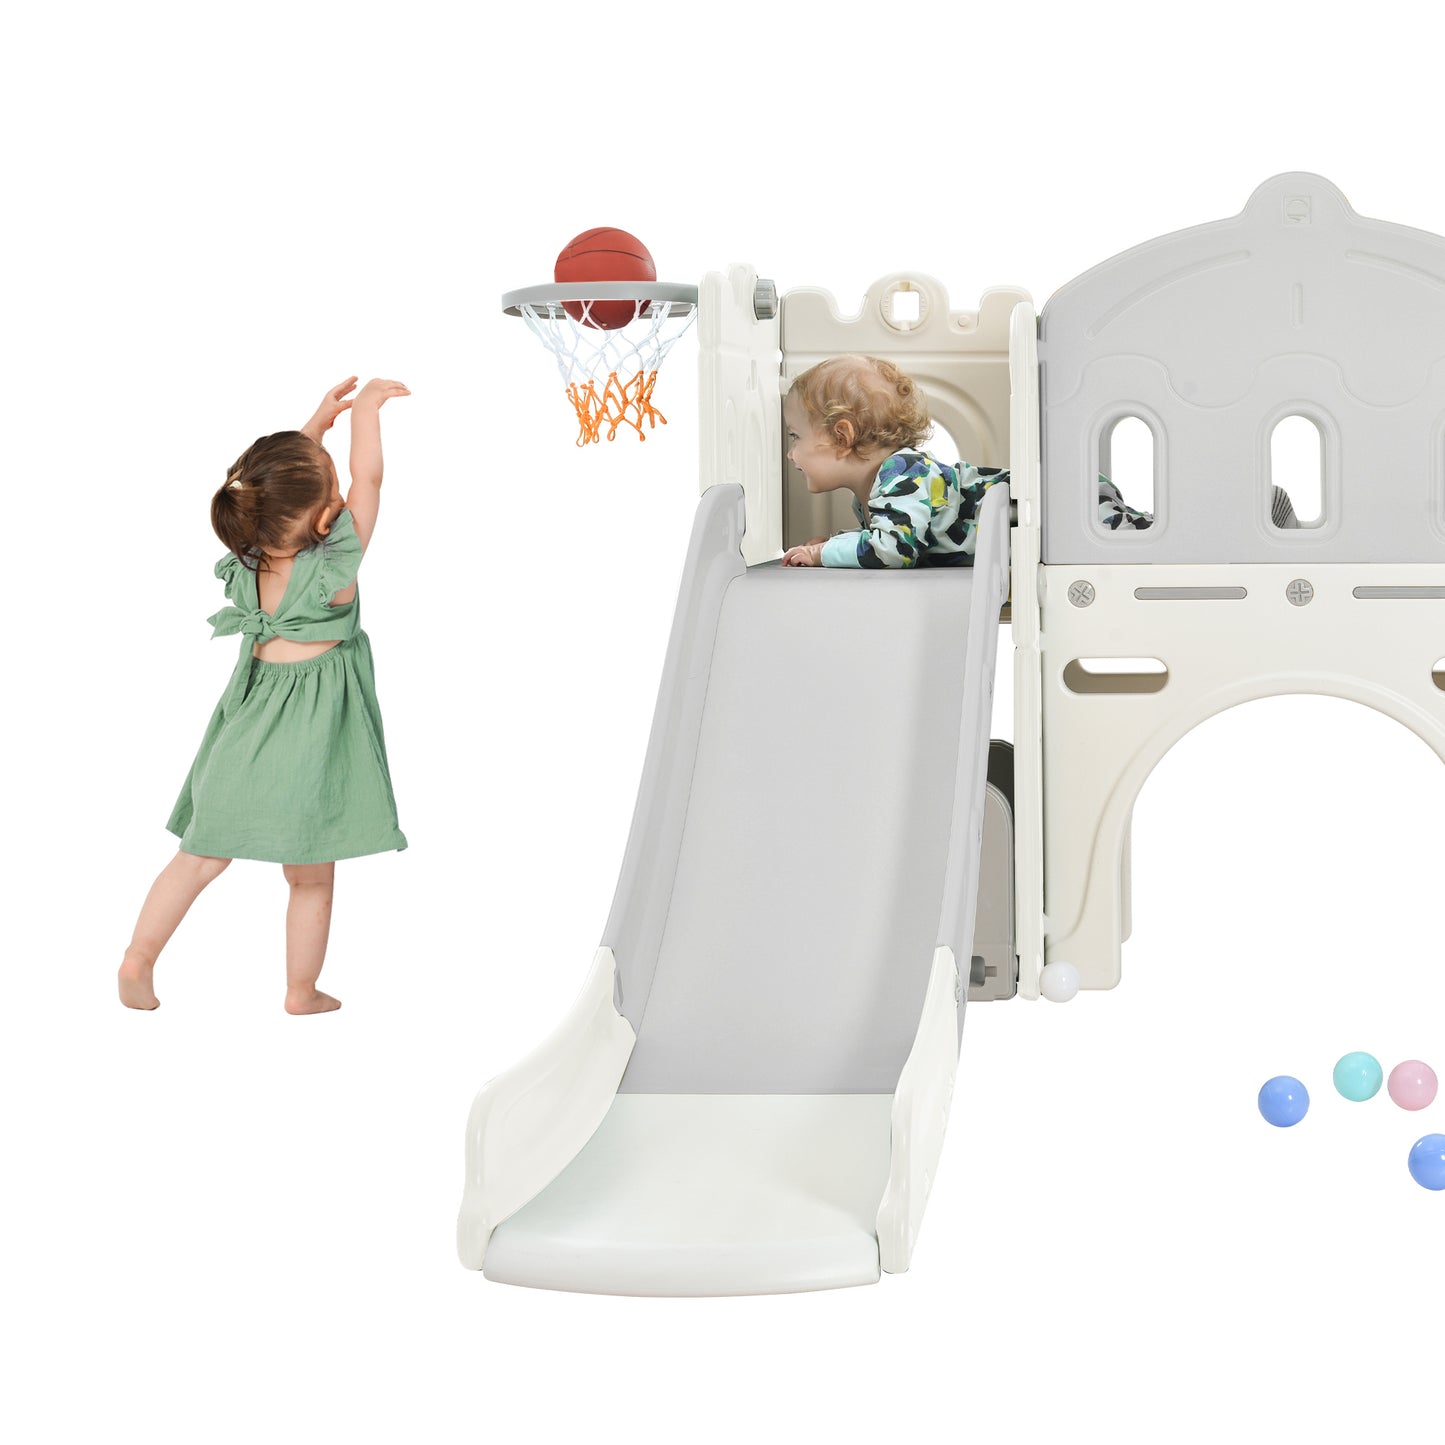 Kids Slide Playset Structure, Freestanding Castle Climber with Slide and Basketball Hoop, Toy Storage Organizer for Toddlers - Indoor/Outdoor Playground Activity, Kids Climbers Playhouse